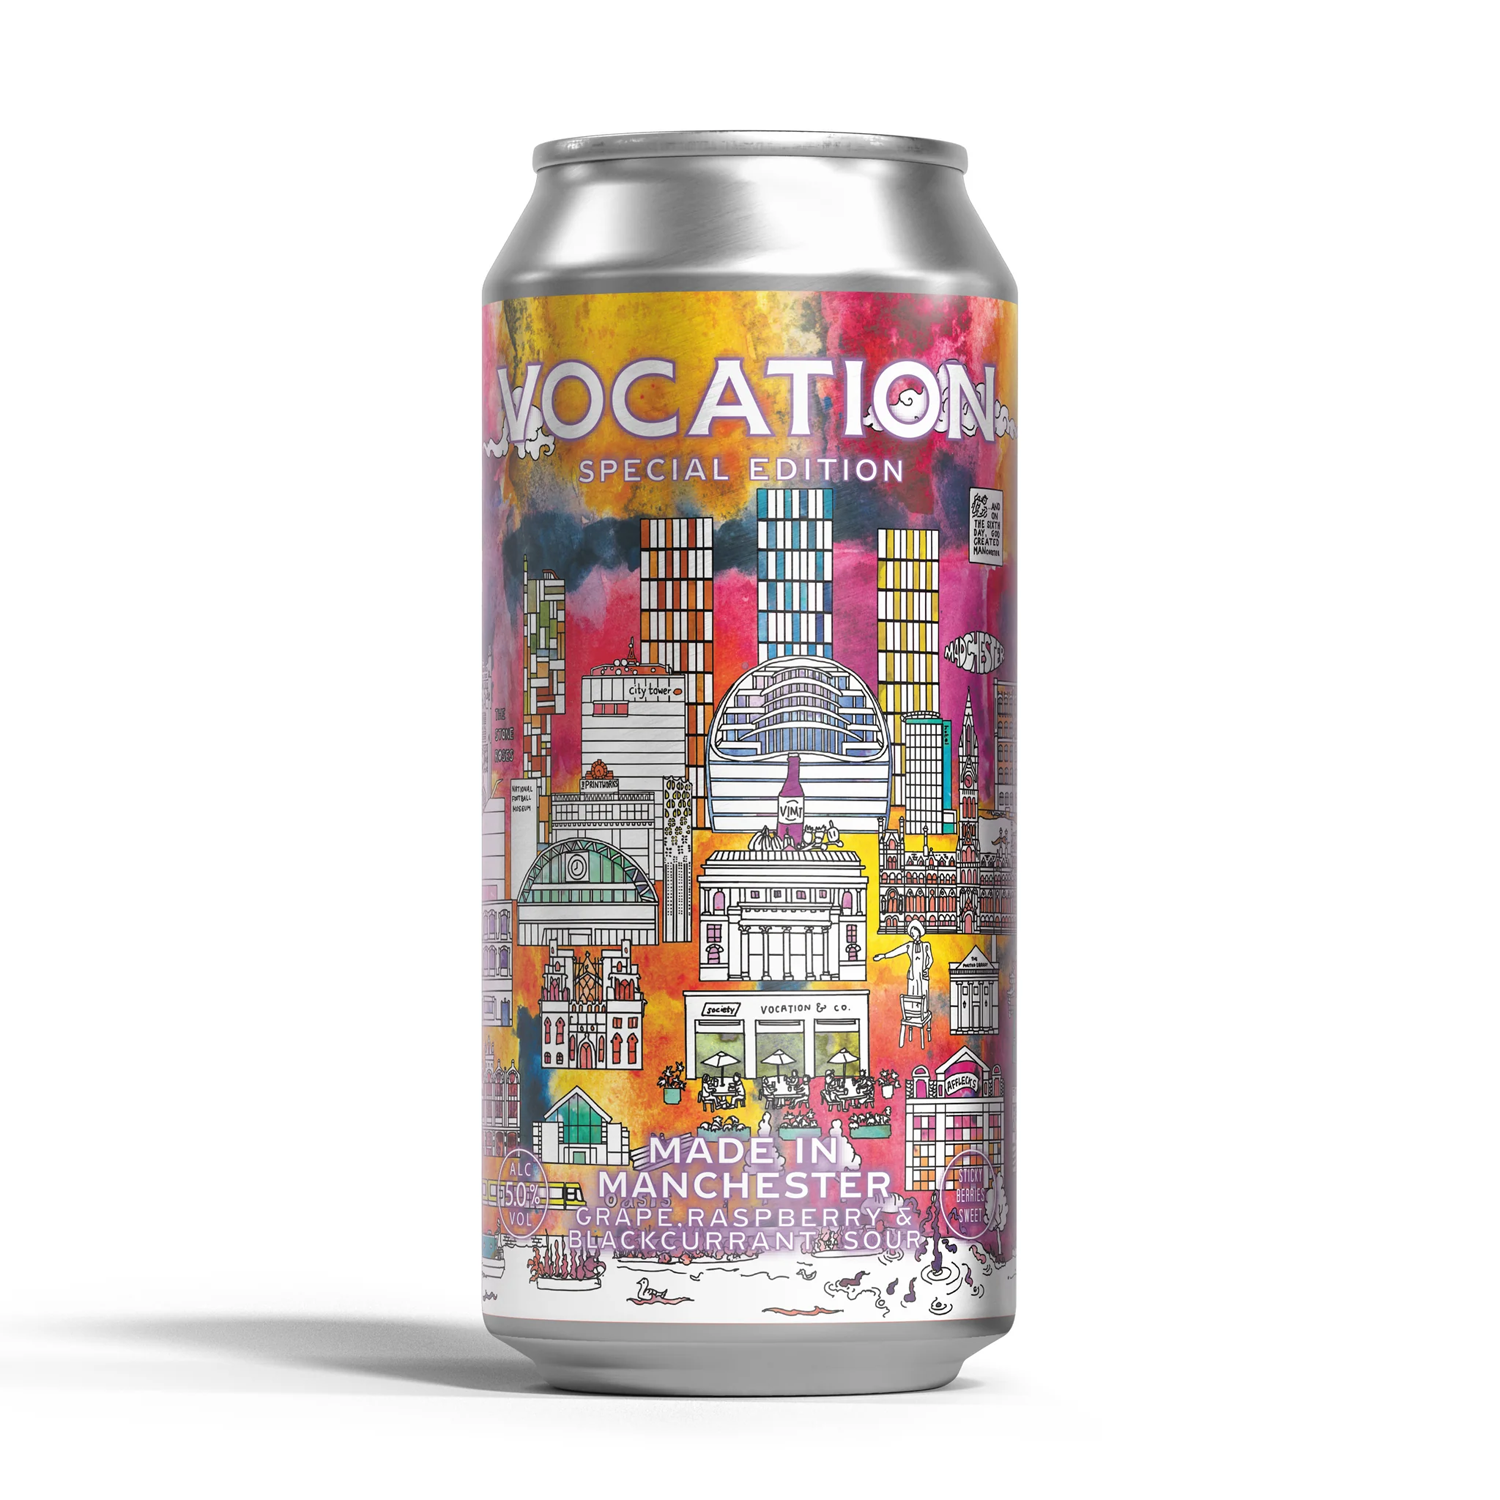 Vocation Made In Manchester Grape Raspberry & Blackcurrant Sour